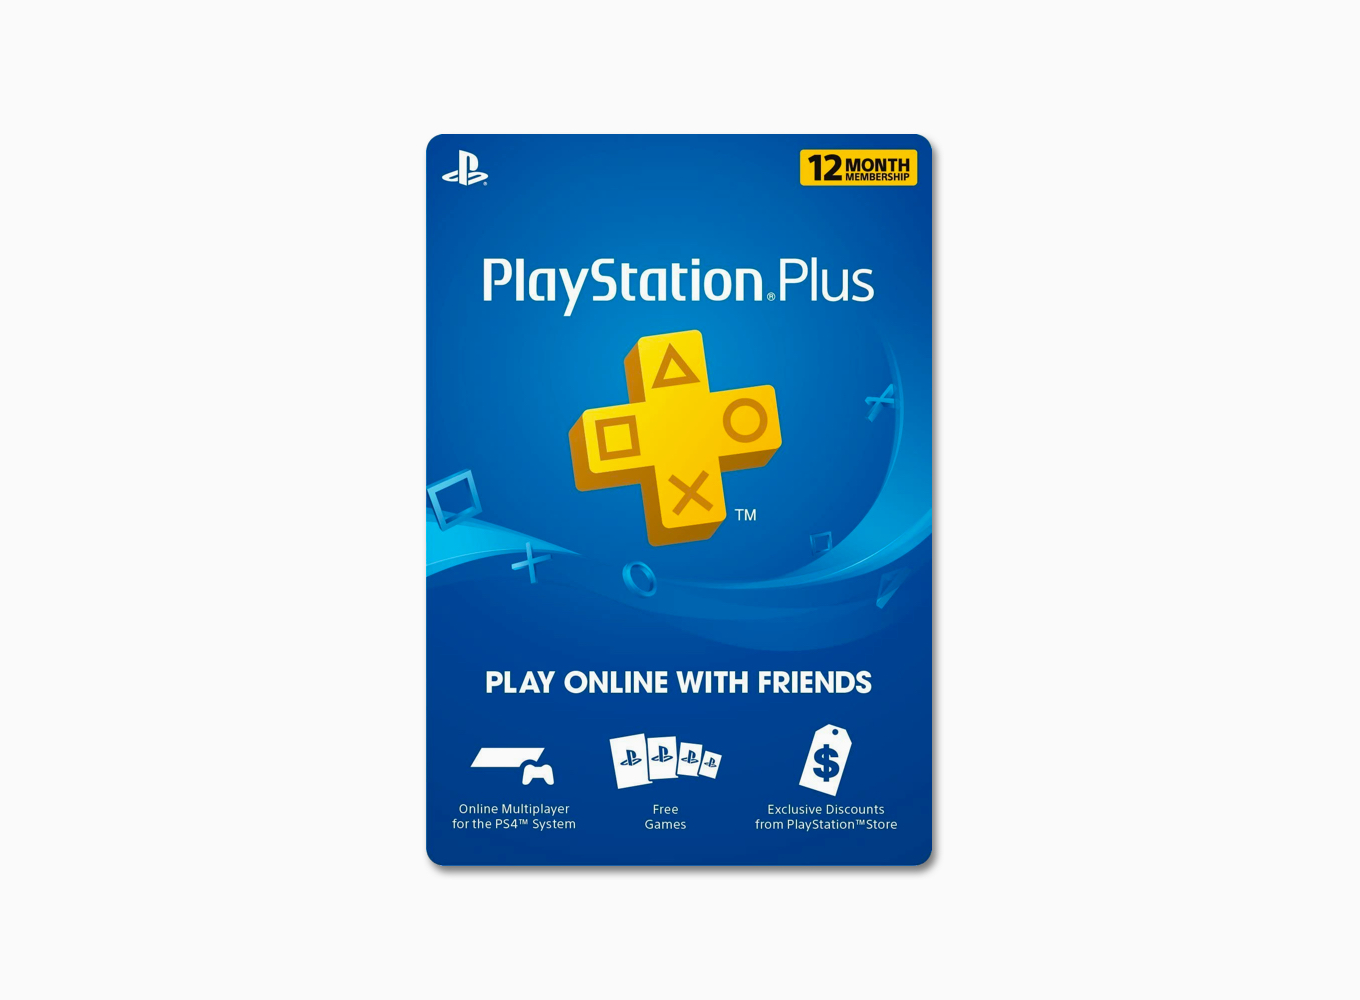 PLAYSTATION PLUS: 12-MONTH SUBSCRIPTION